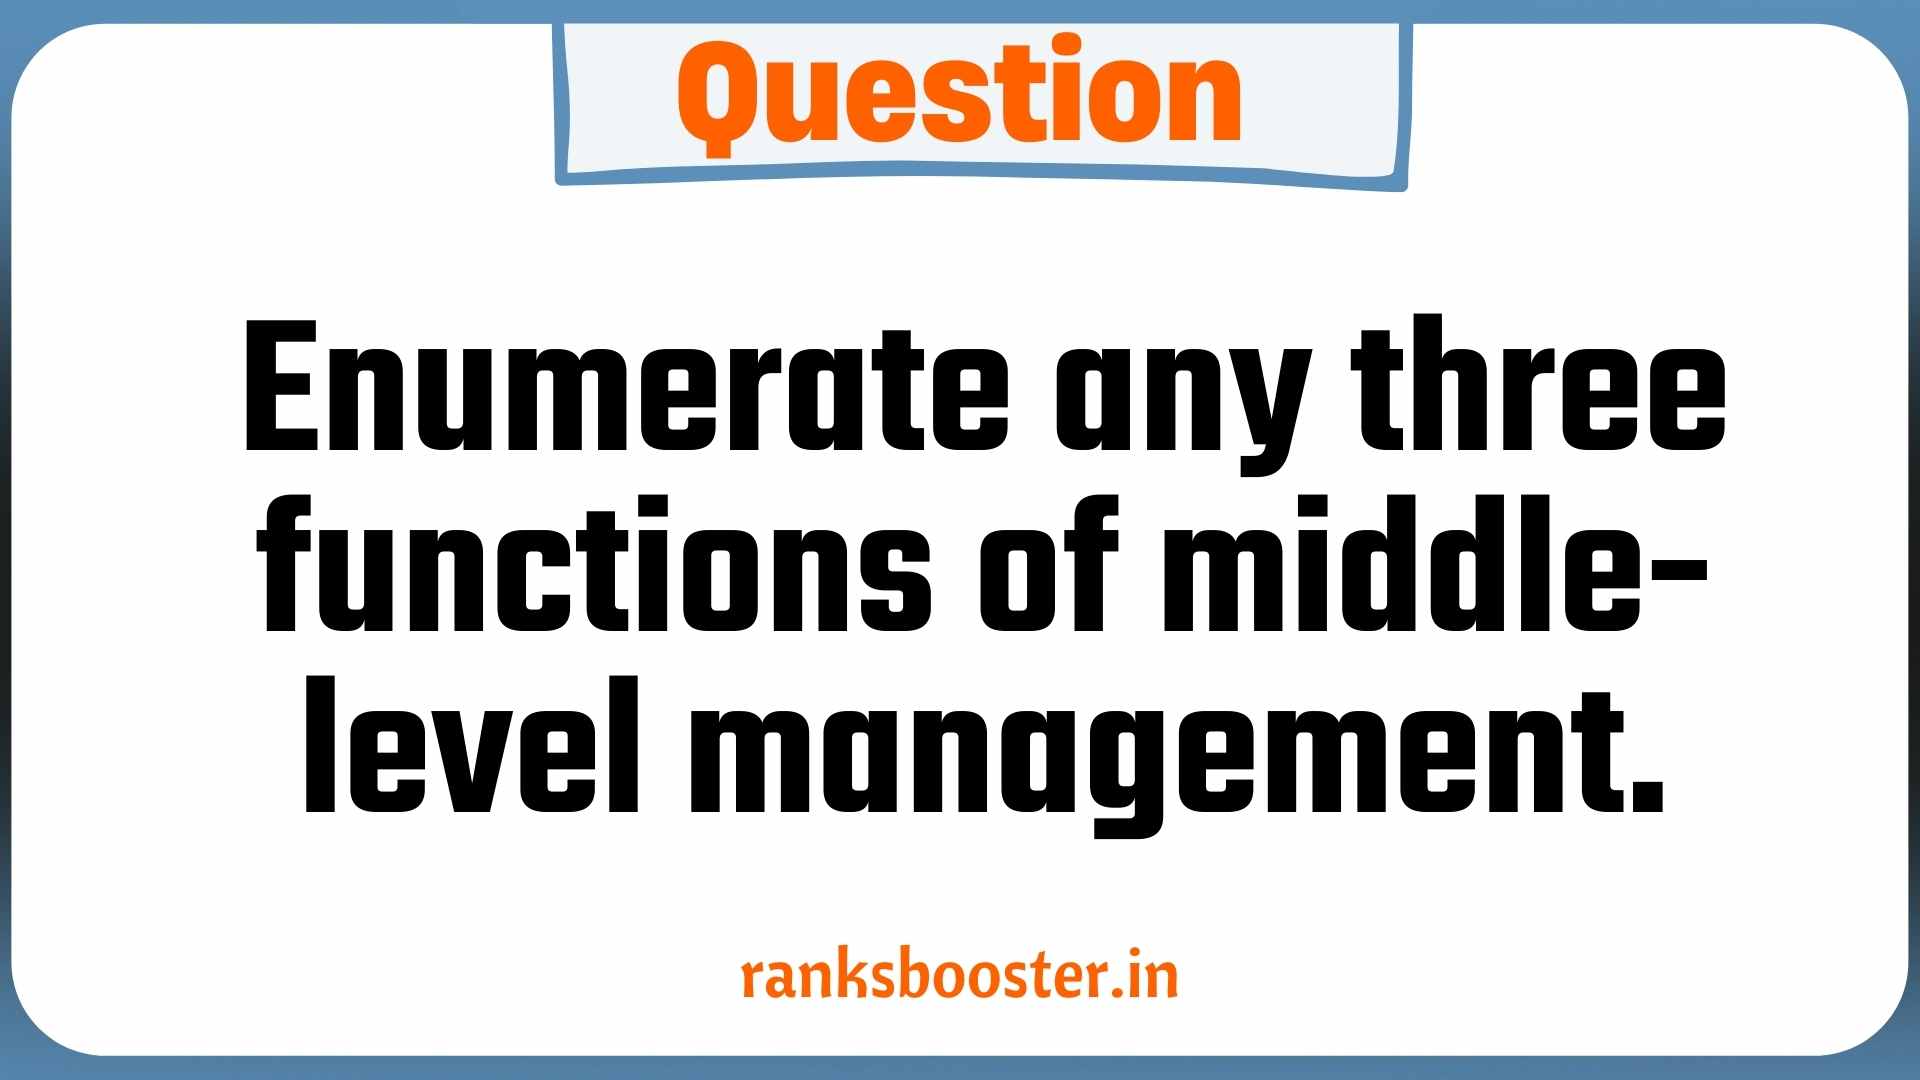 Question: Enumerate any three functions of middle-level management